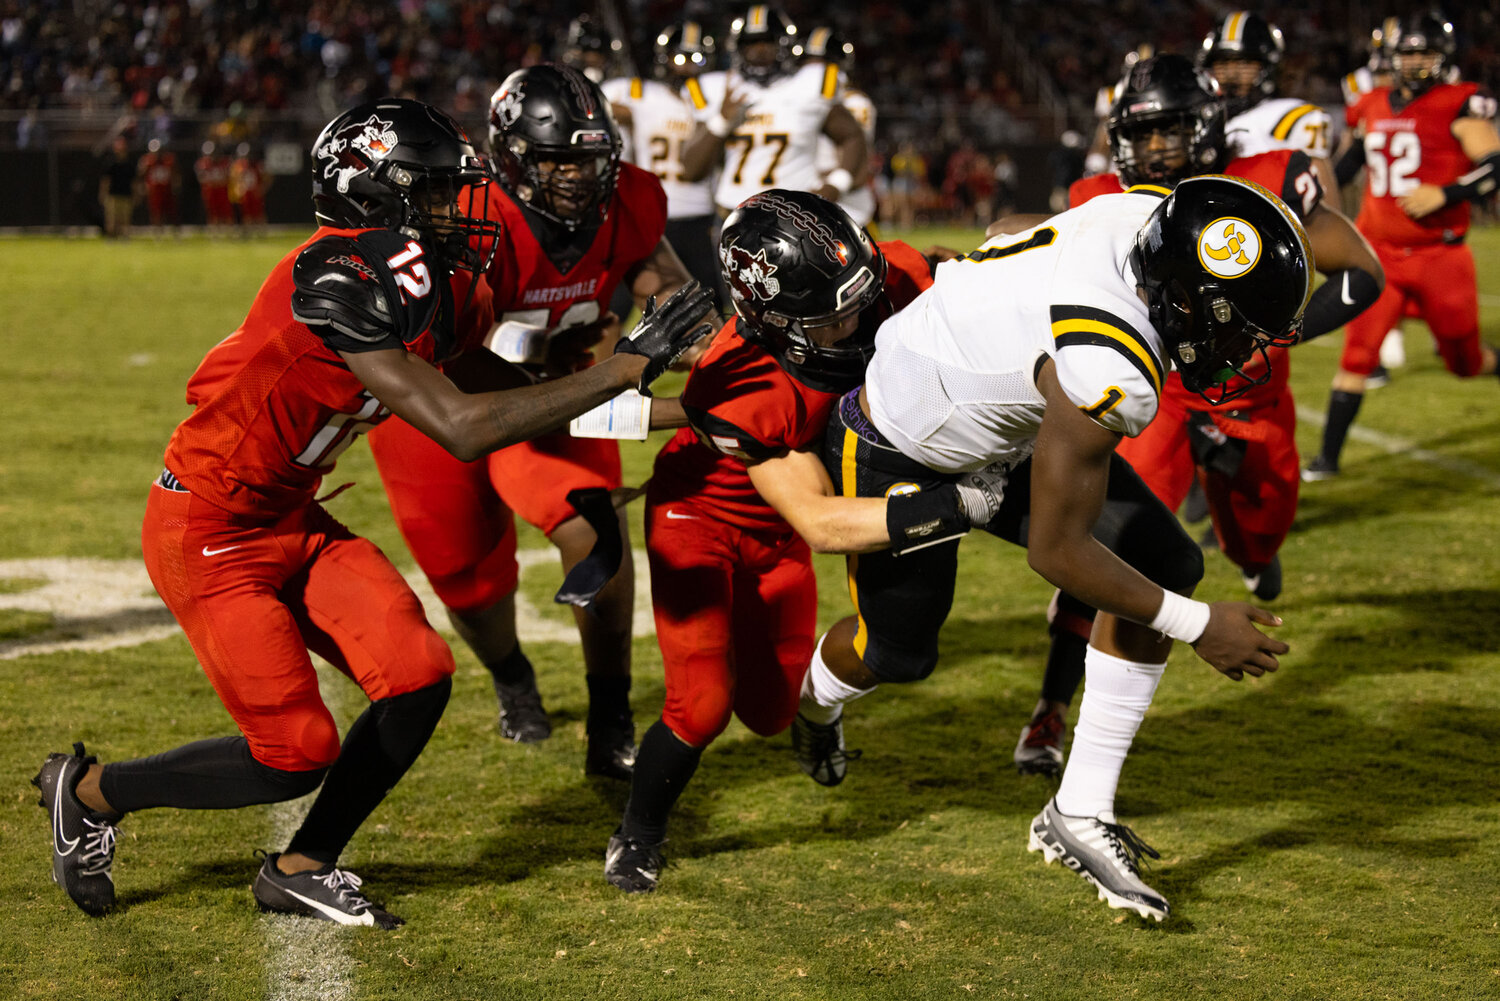 Yellow Jackets quarterback Aaron Brand runs the ball toward the sideline in the second quarter of Irmo's 35-21 win over Hartsville.